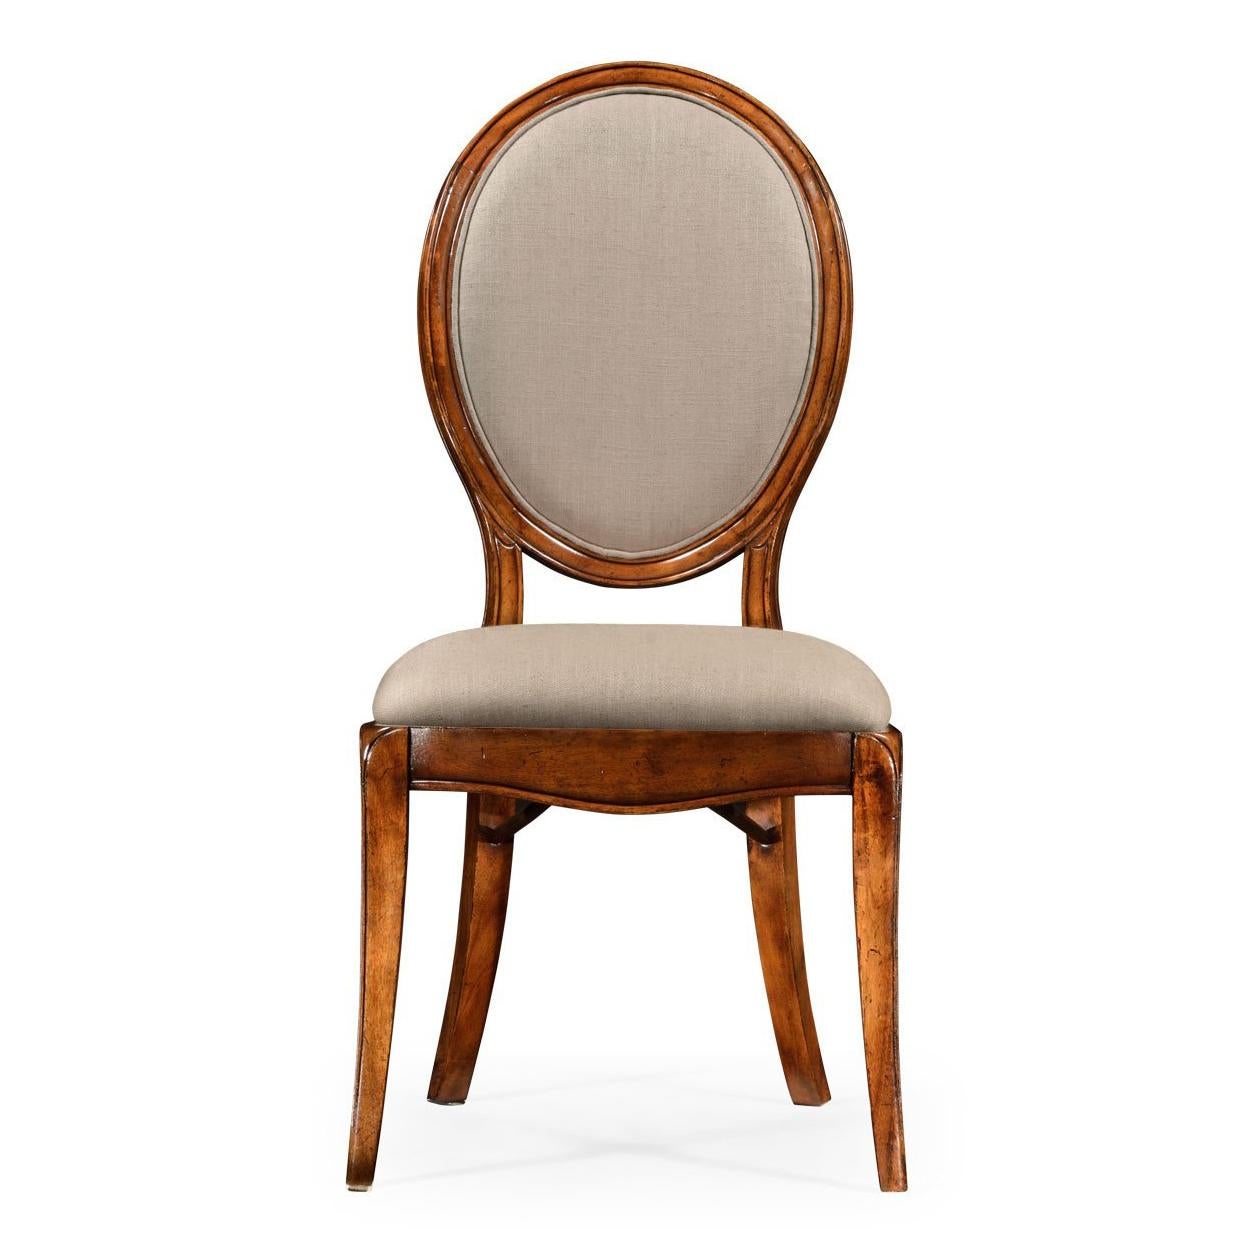 A spoon back walnut dining chair with simple molding to the frame, neutrally upholstered seat and curved back panel, and serpentine front rail. Tapering curved legs to the front and raked legs to the rear. The original of circa 1790.

Dimensions: